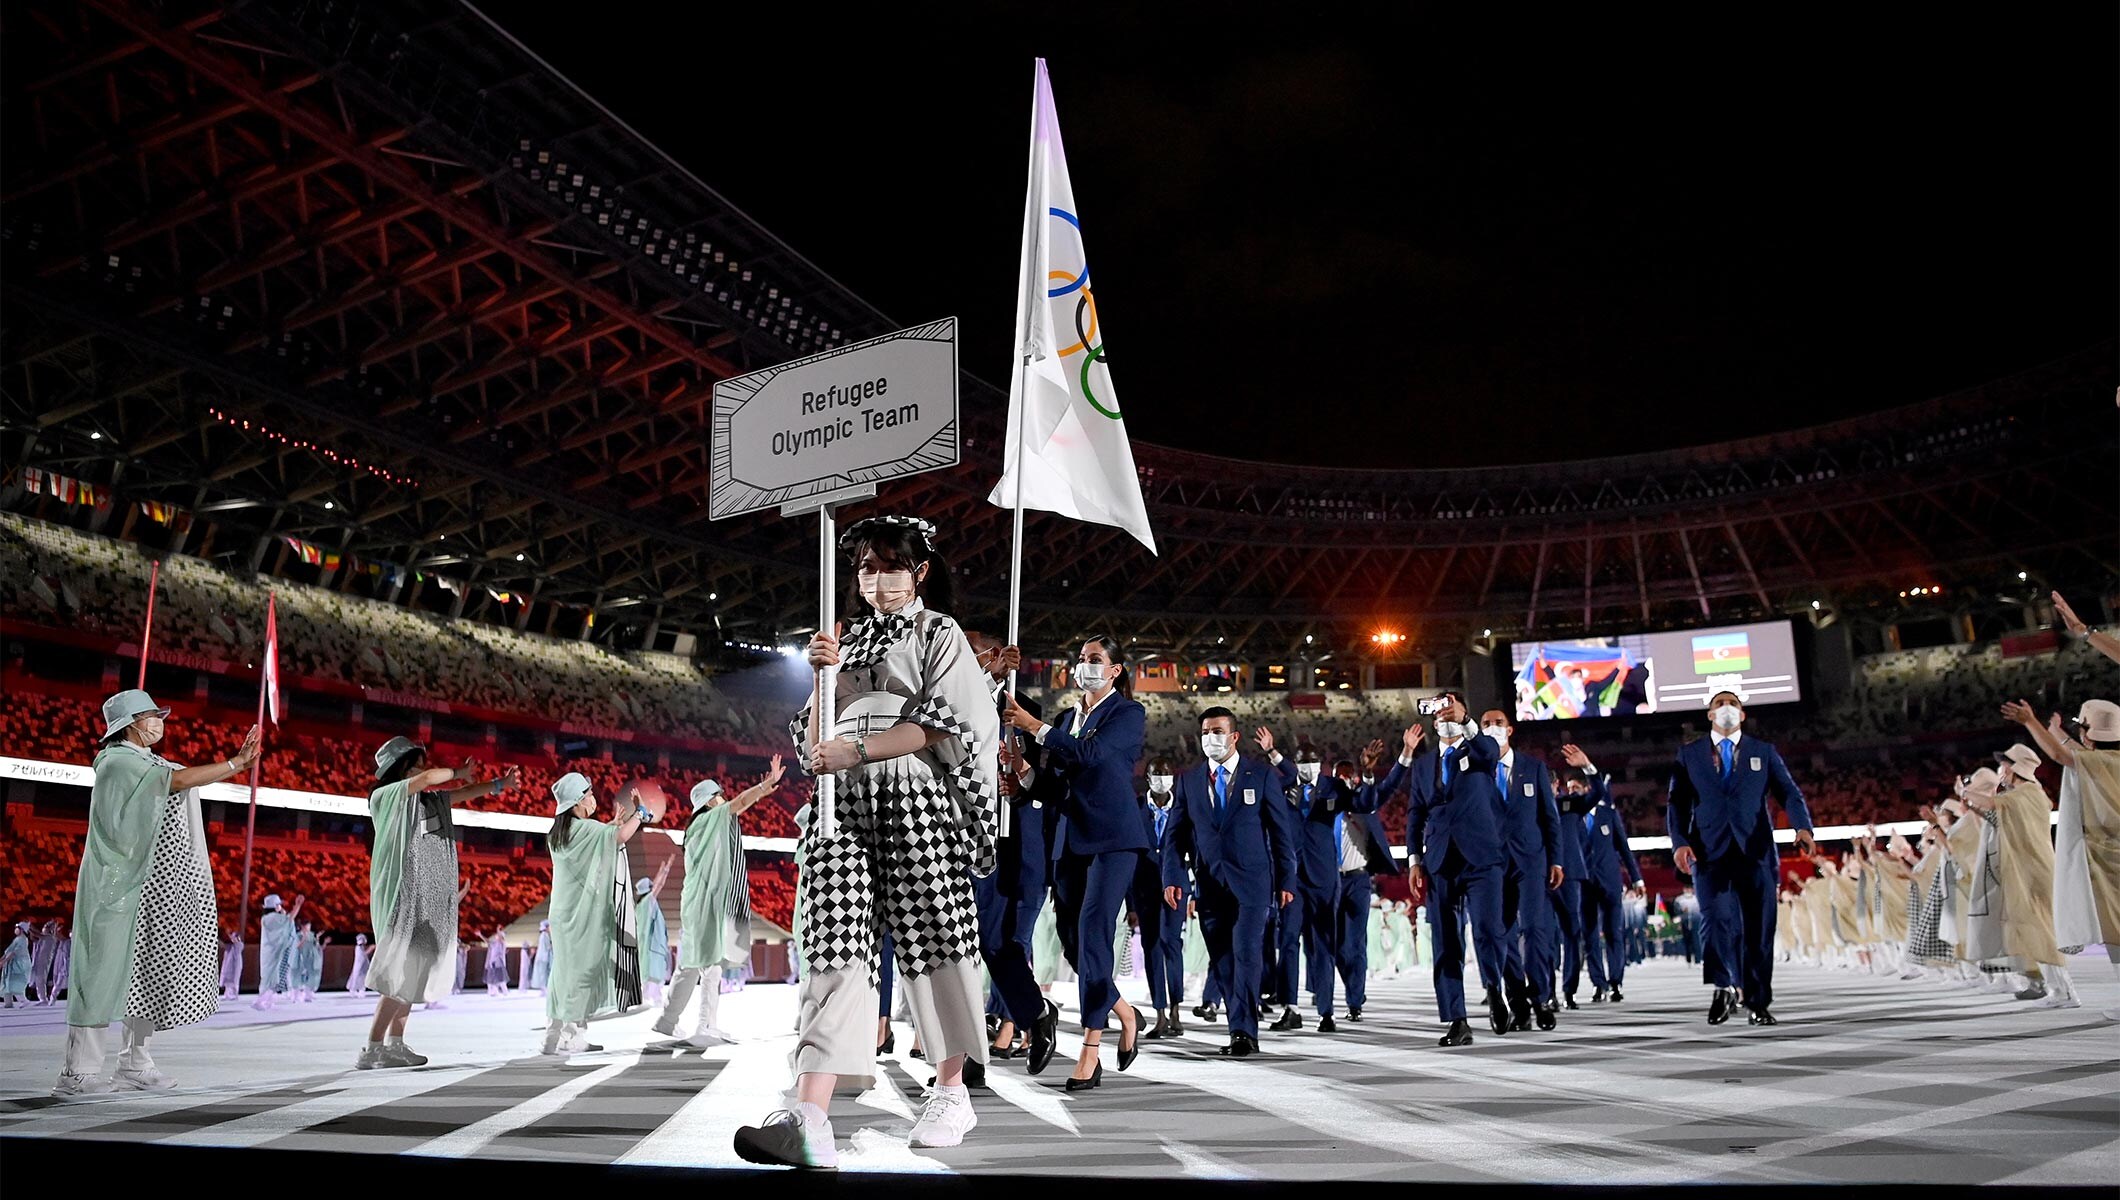 The Refugee Olympic Team during the Opening Ceremony of the Tokyo 2020 Olympic Games